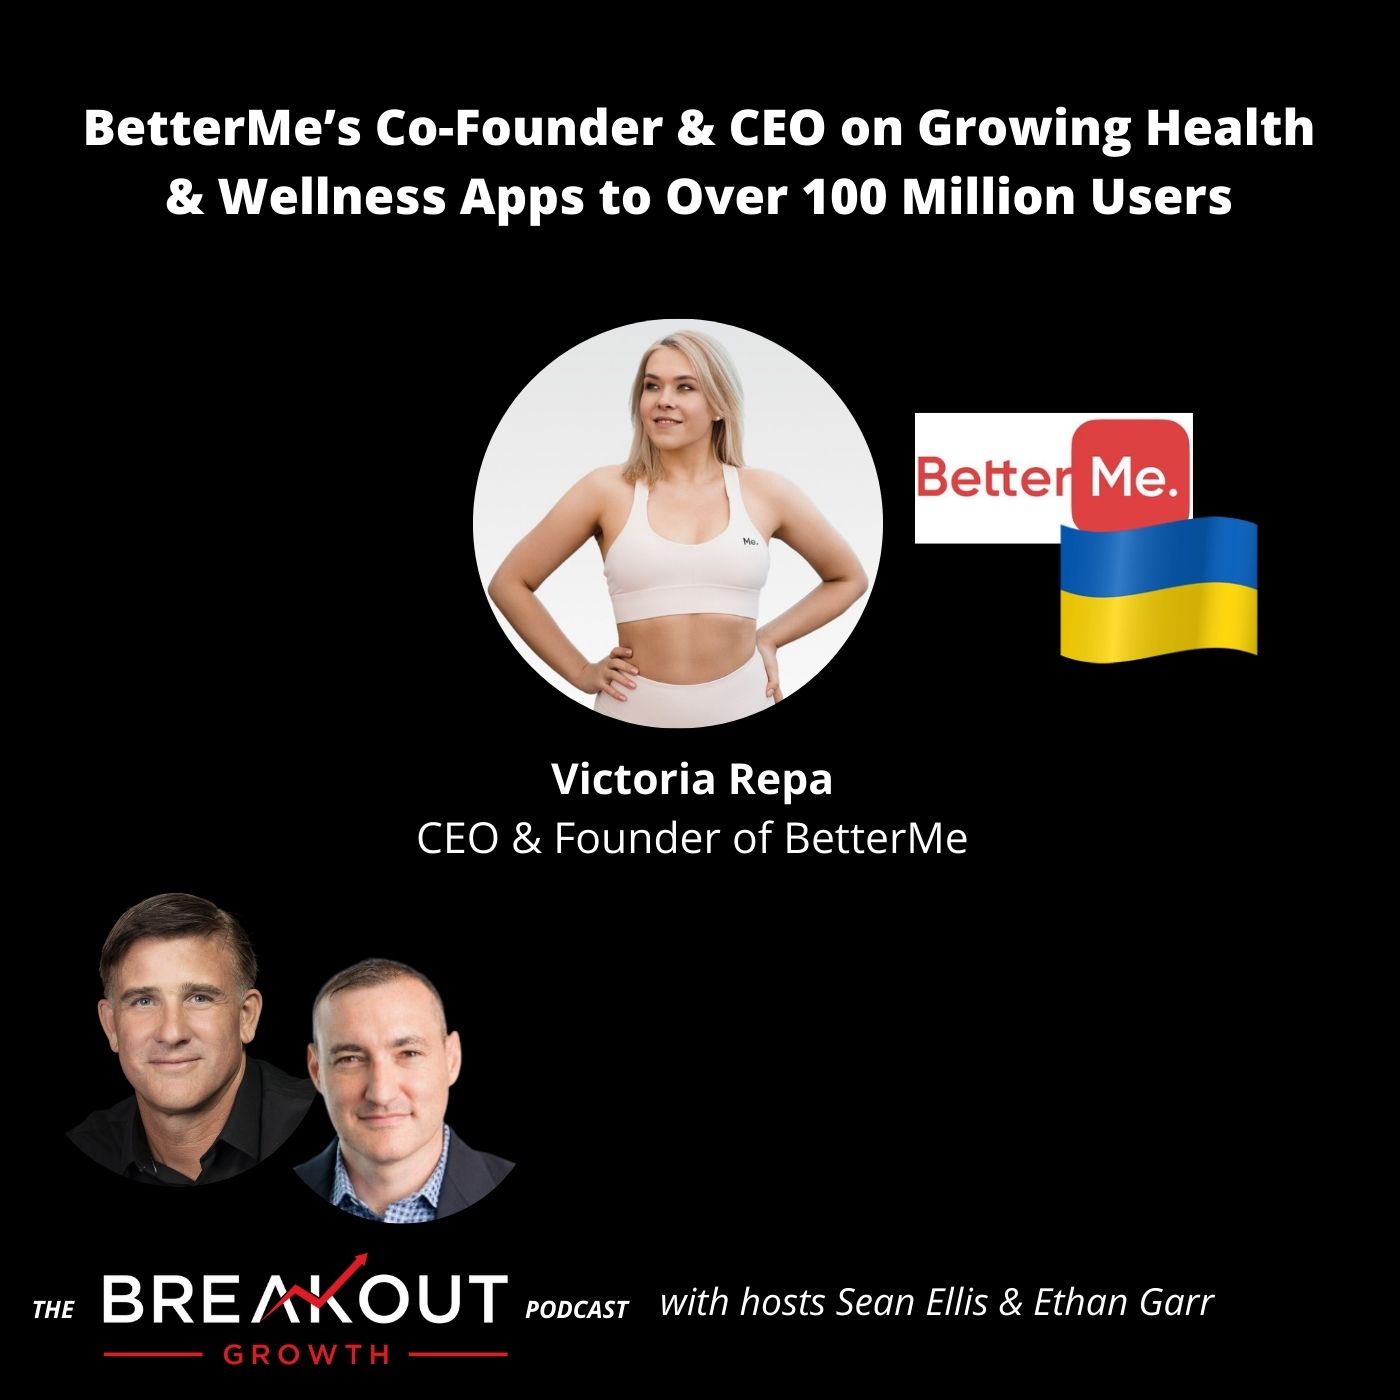 BetterMe’s Founder & CEO on Growing Health & Wellness Apps to Over 100 Million Users